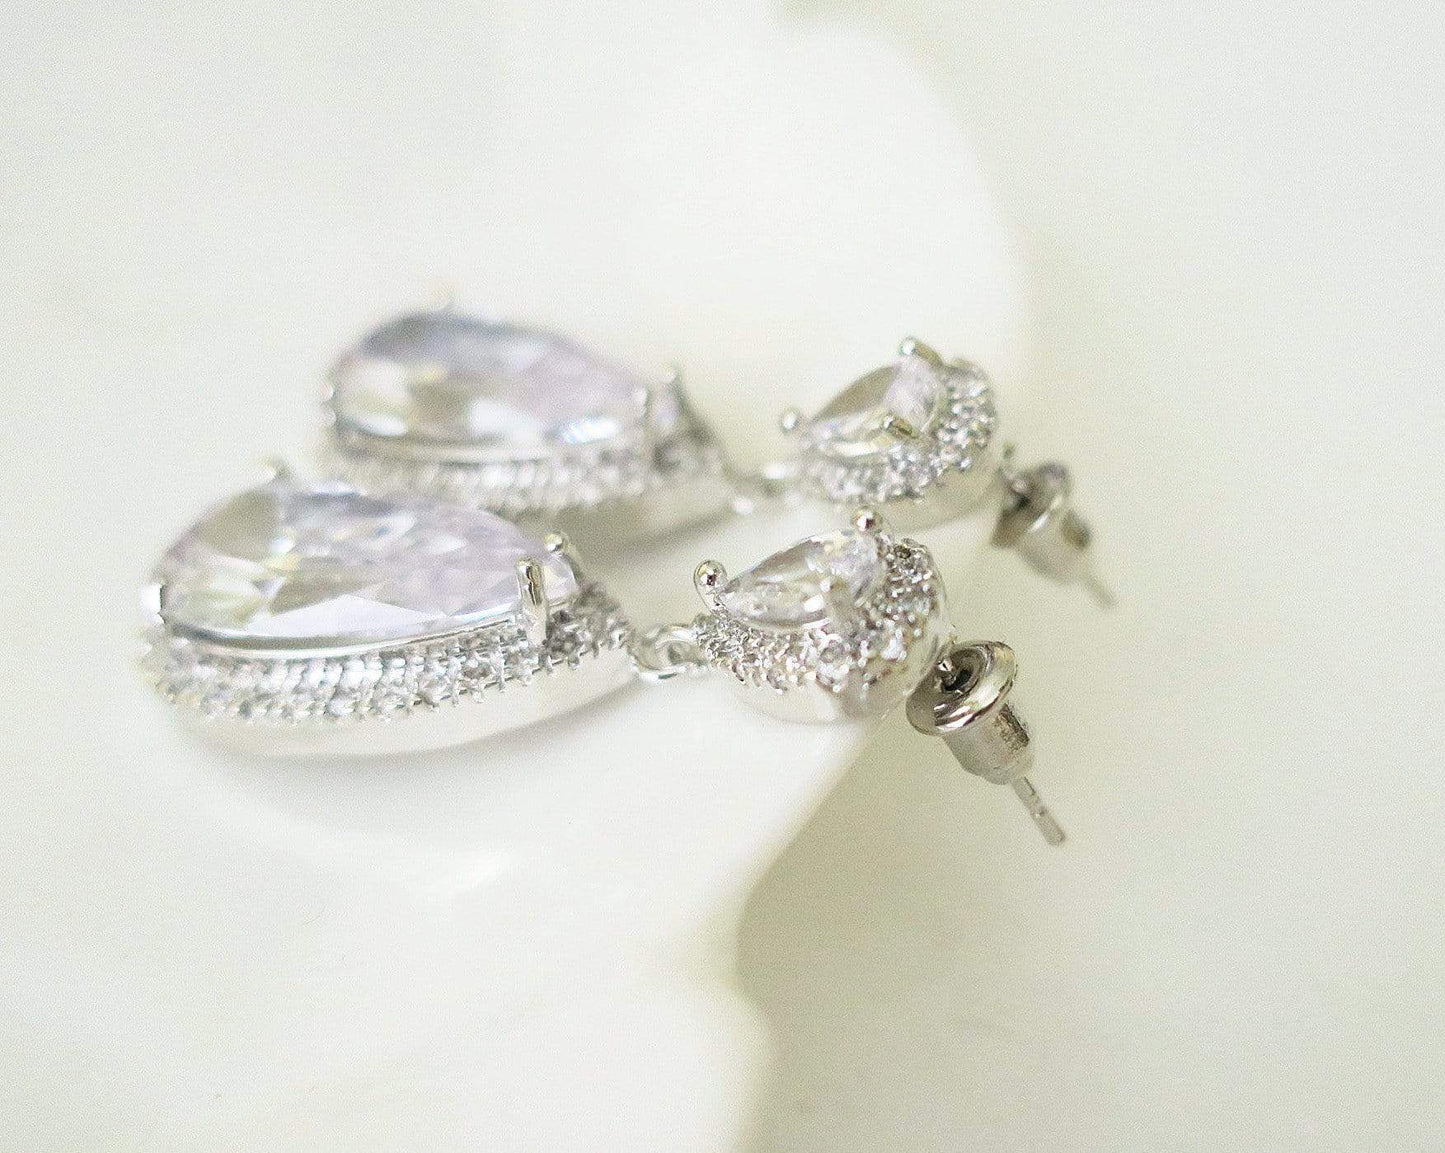 Cubic Zirconia Drop Earrings in Old Hollywood Style for The Bride